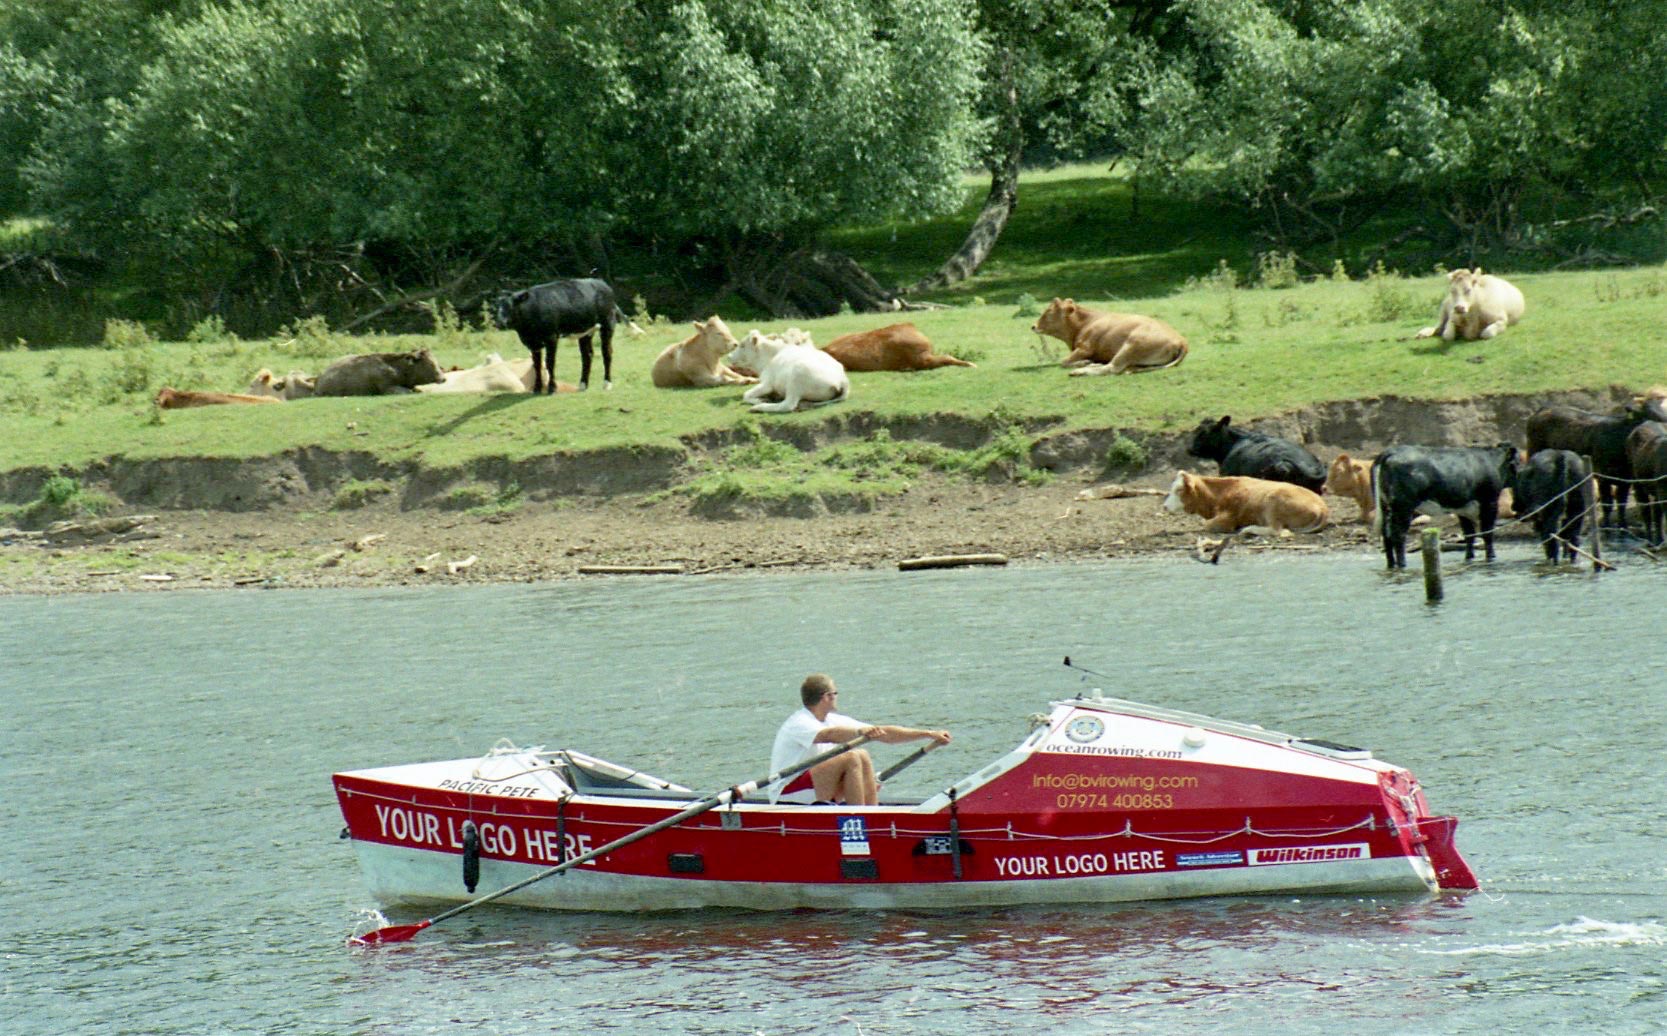 Sam in Pacific Pete on River Trent, cattle on bank